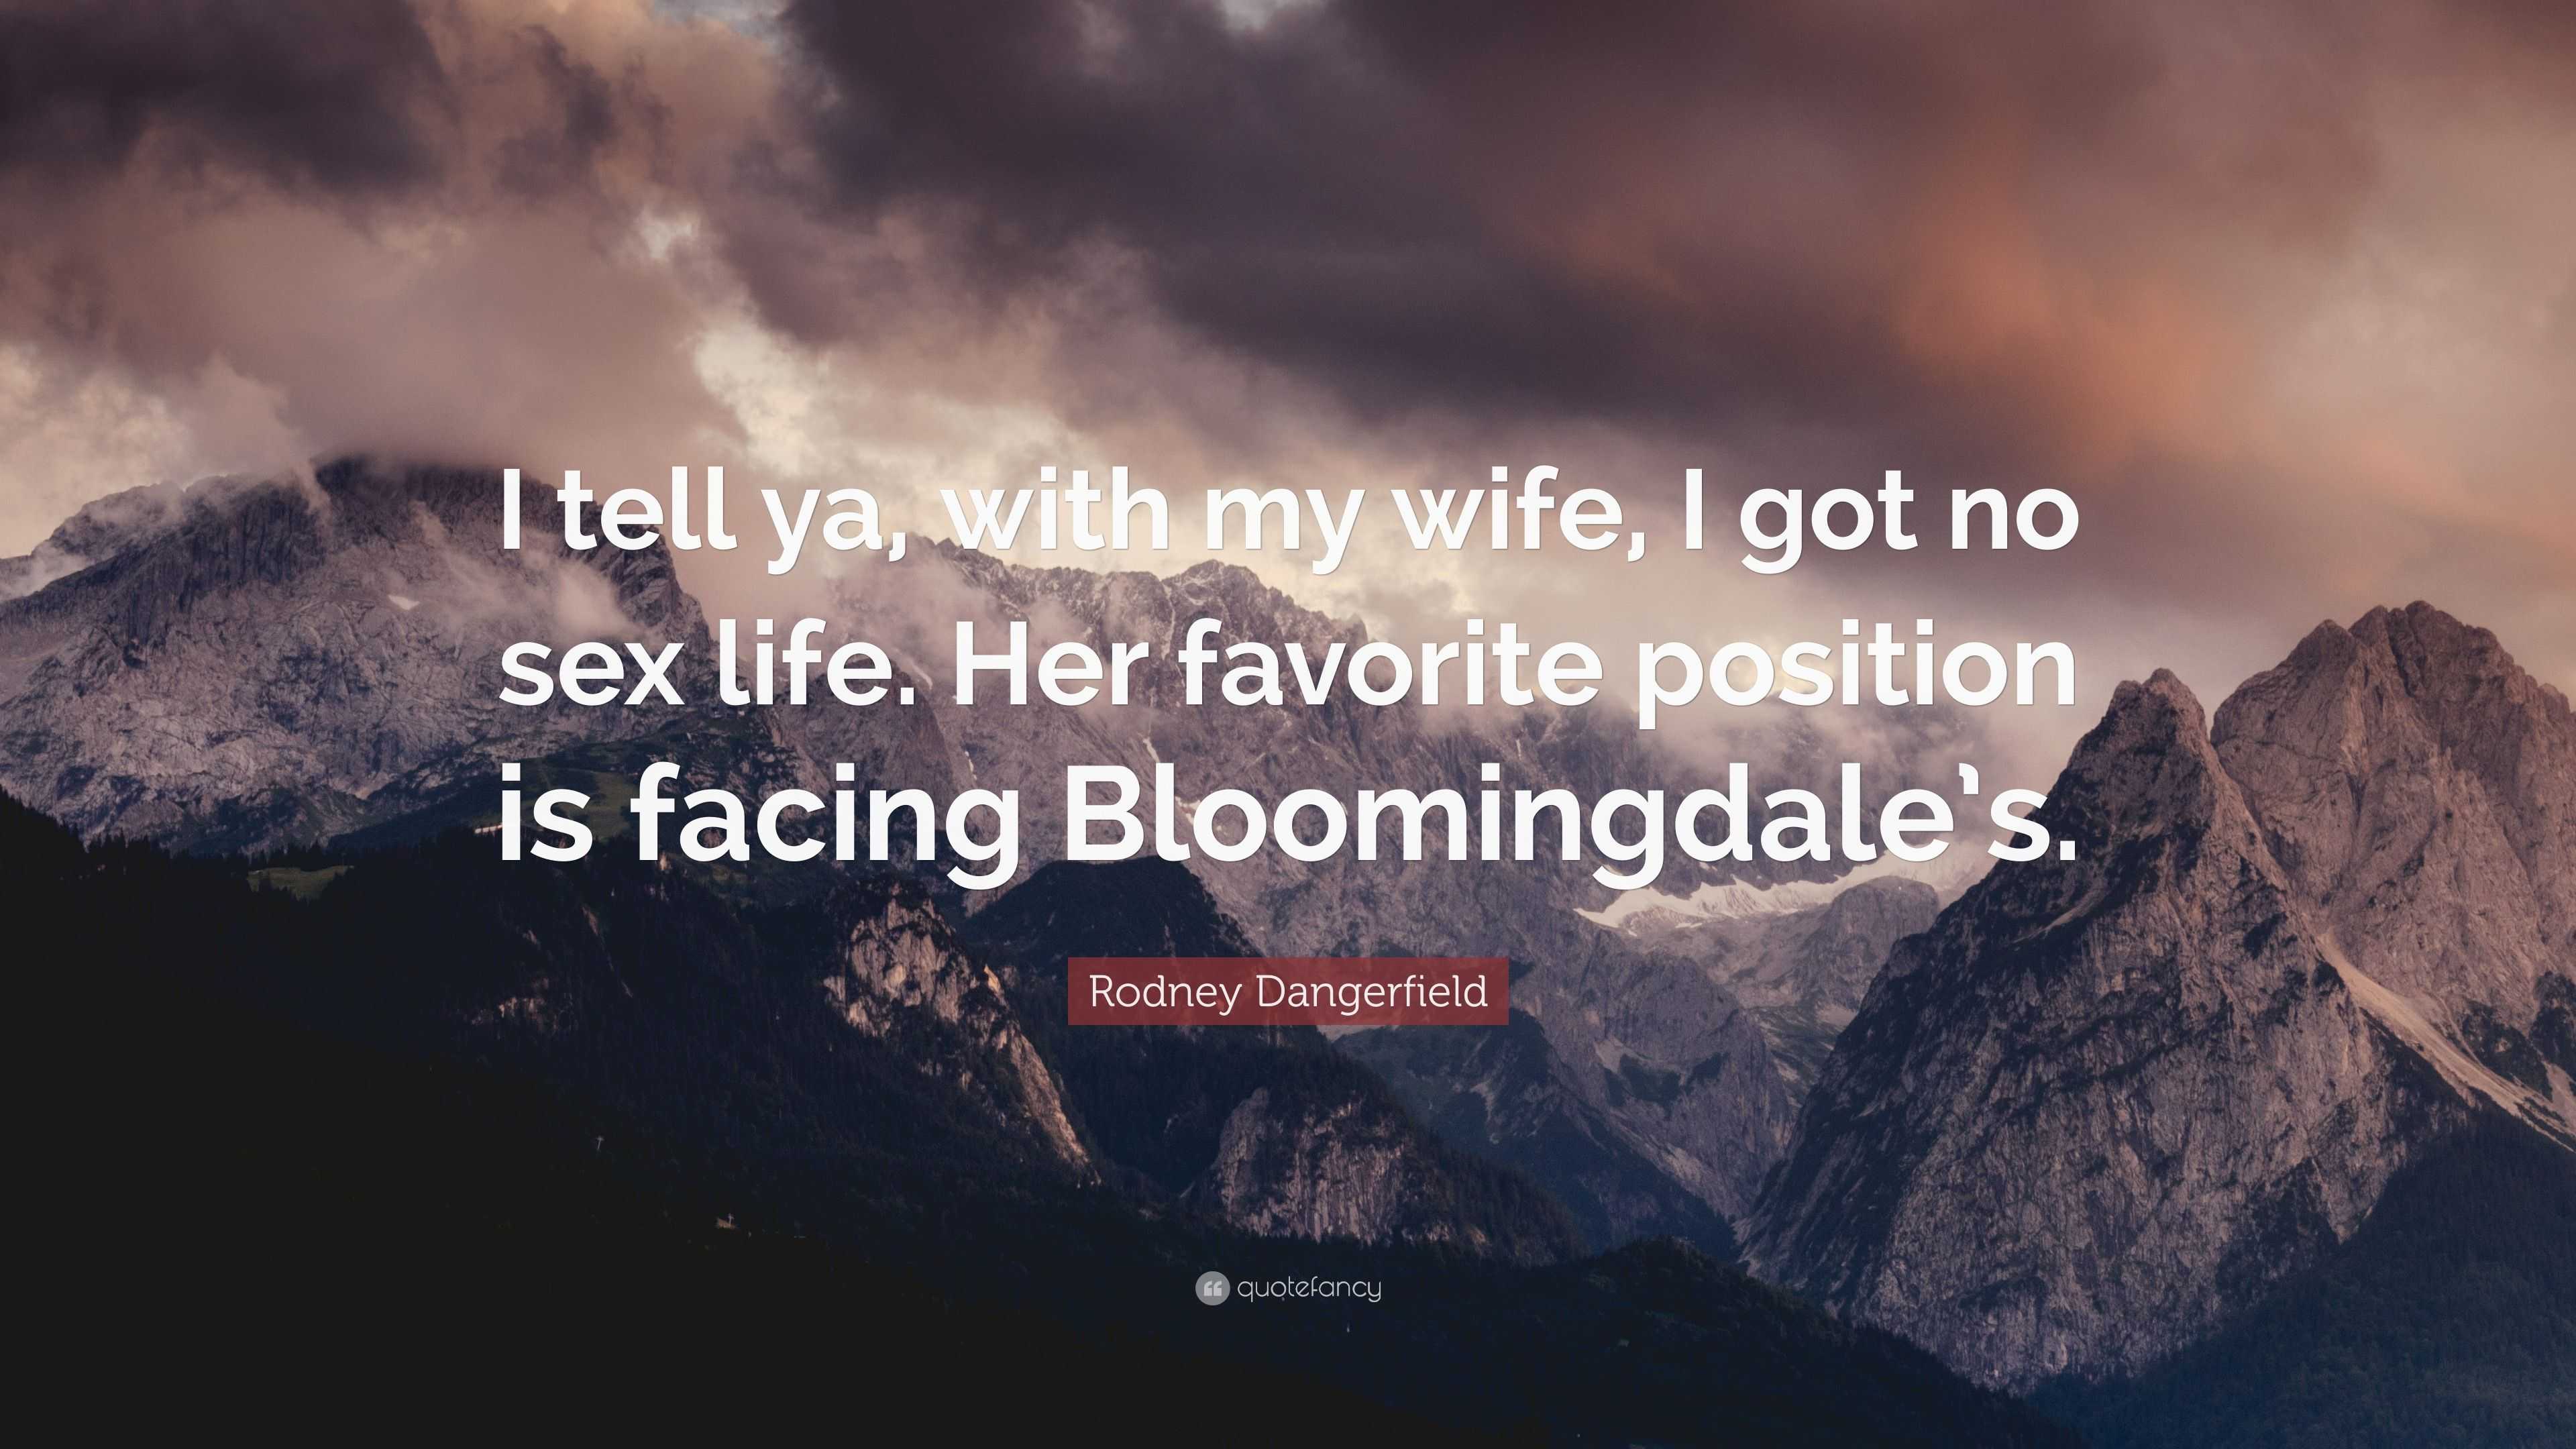 Rodney Dangerfield Quote “I tell ya, with my wife, I got no sex life picture